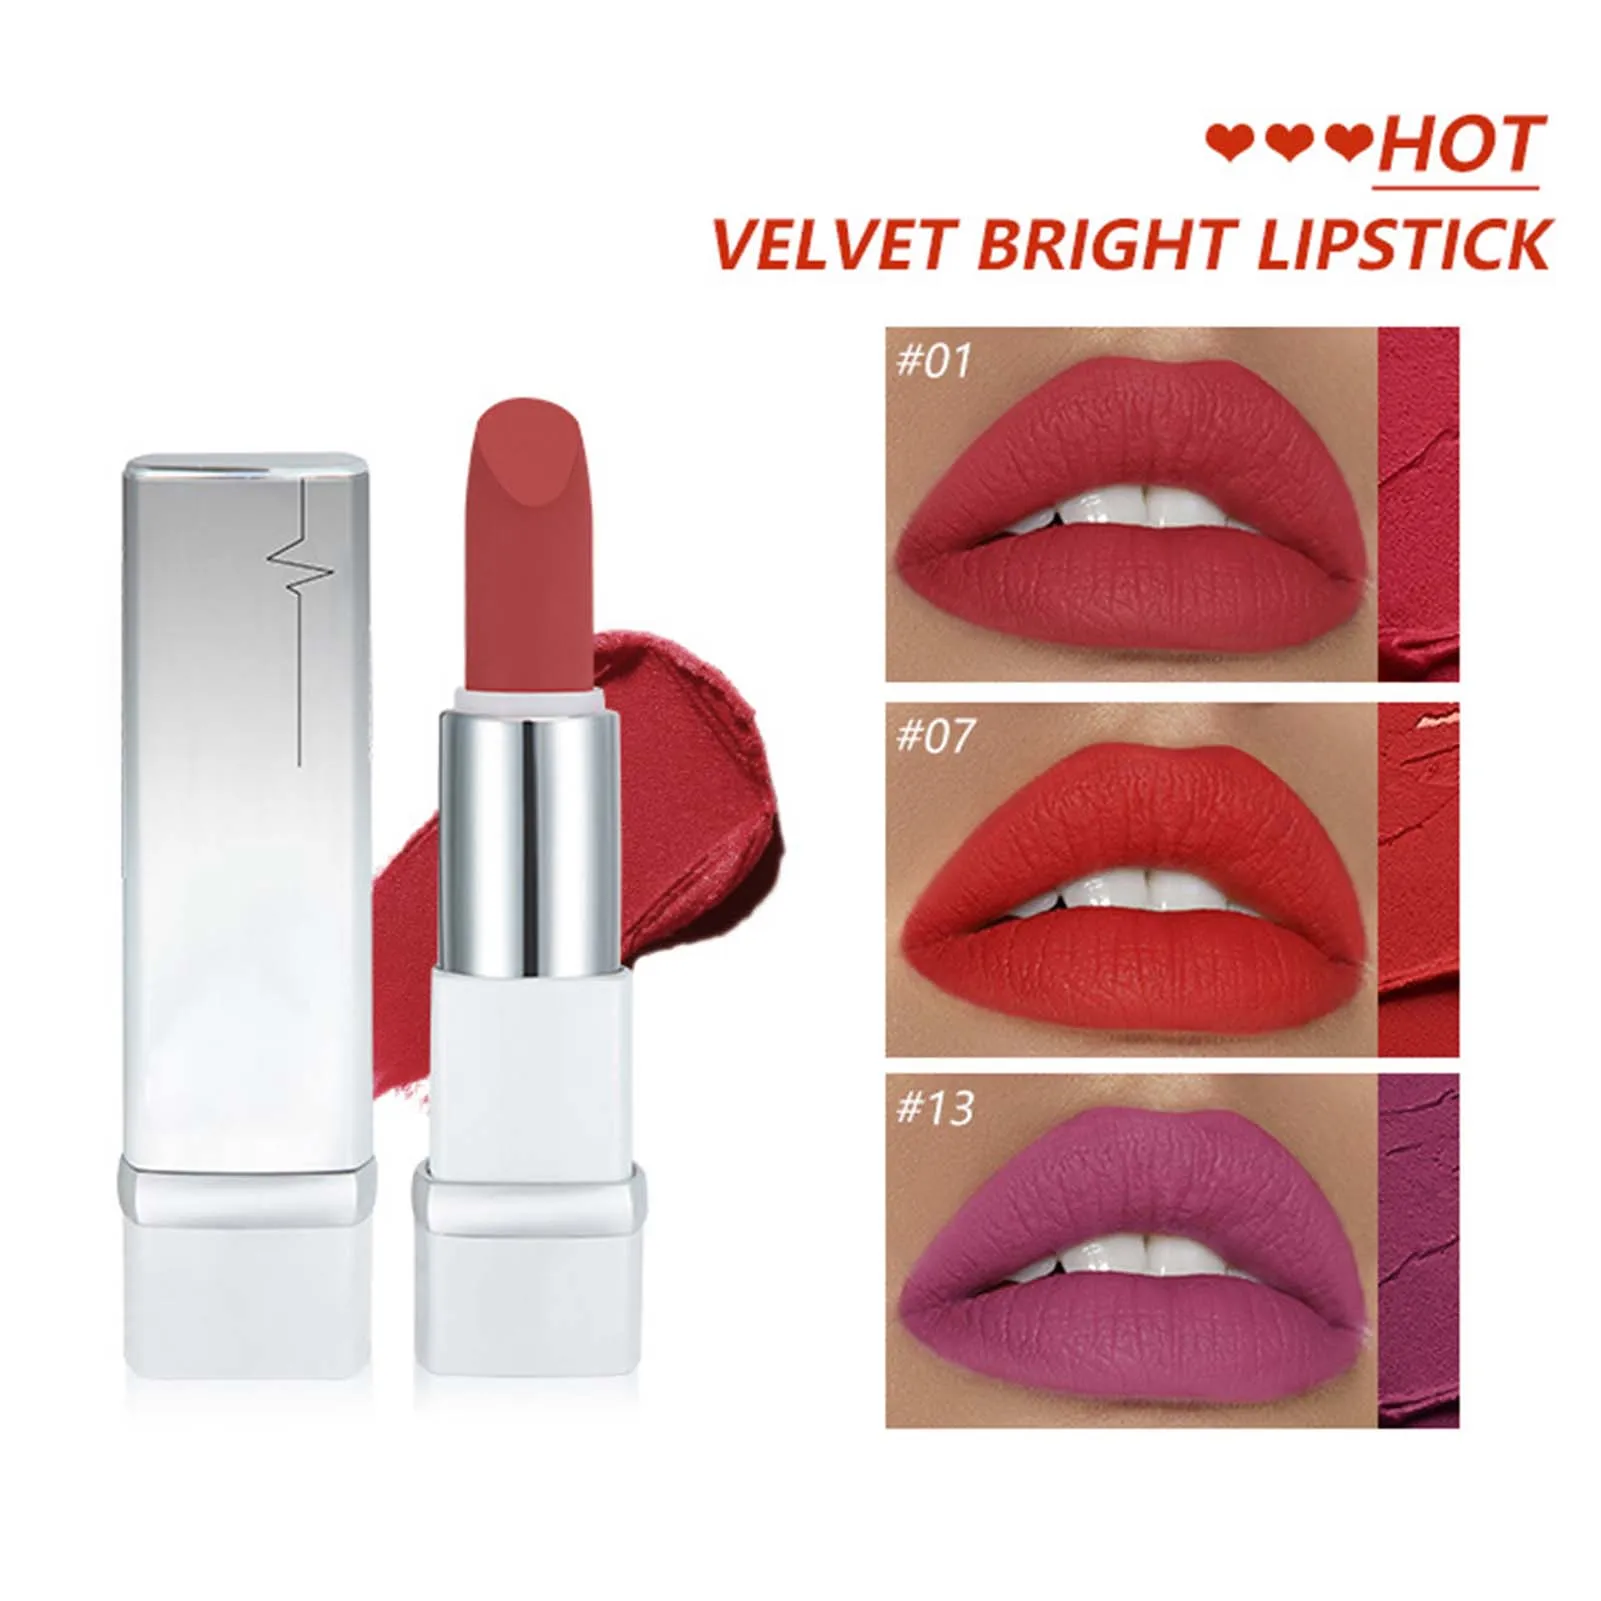 

Squared Tube Velvets Texture Matte Lipstick Colorful Non-Stick Cup Lip Tint For Women Girls Well Loved And Praised Female Use